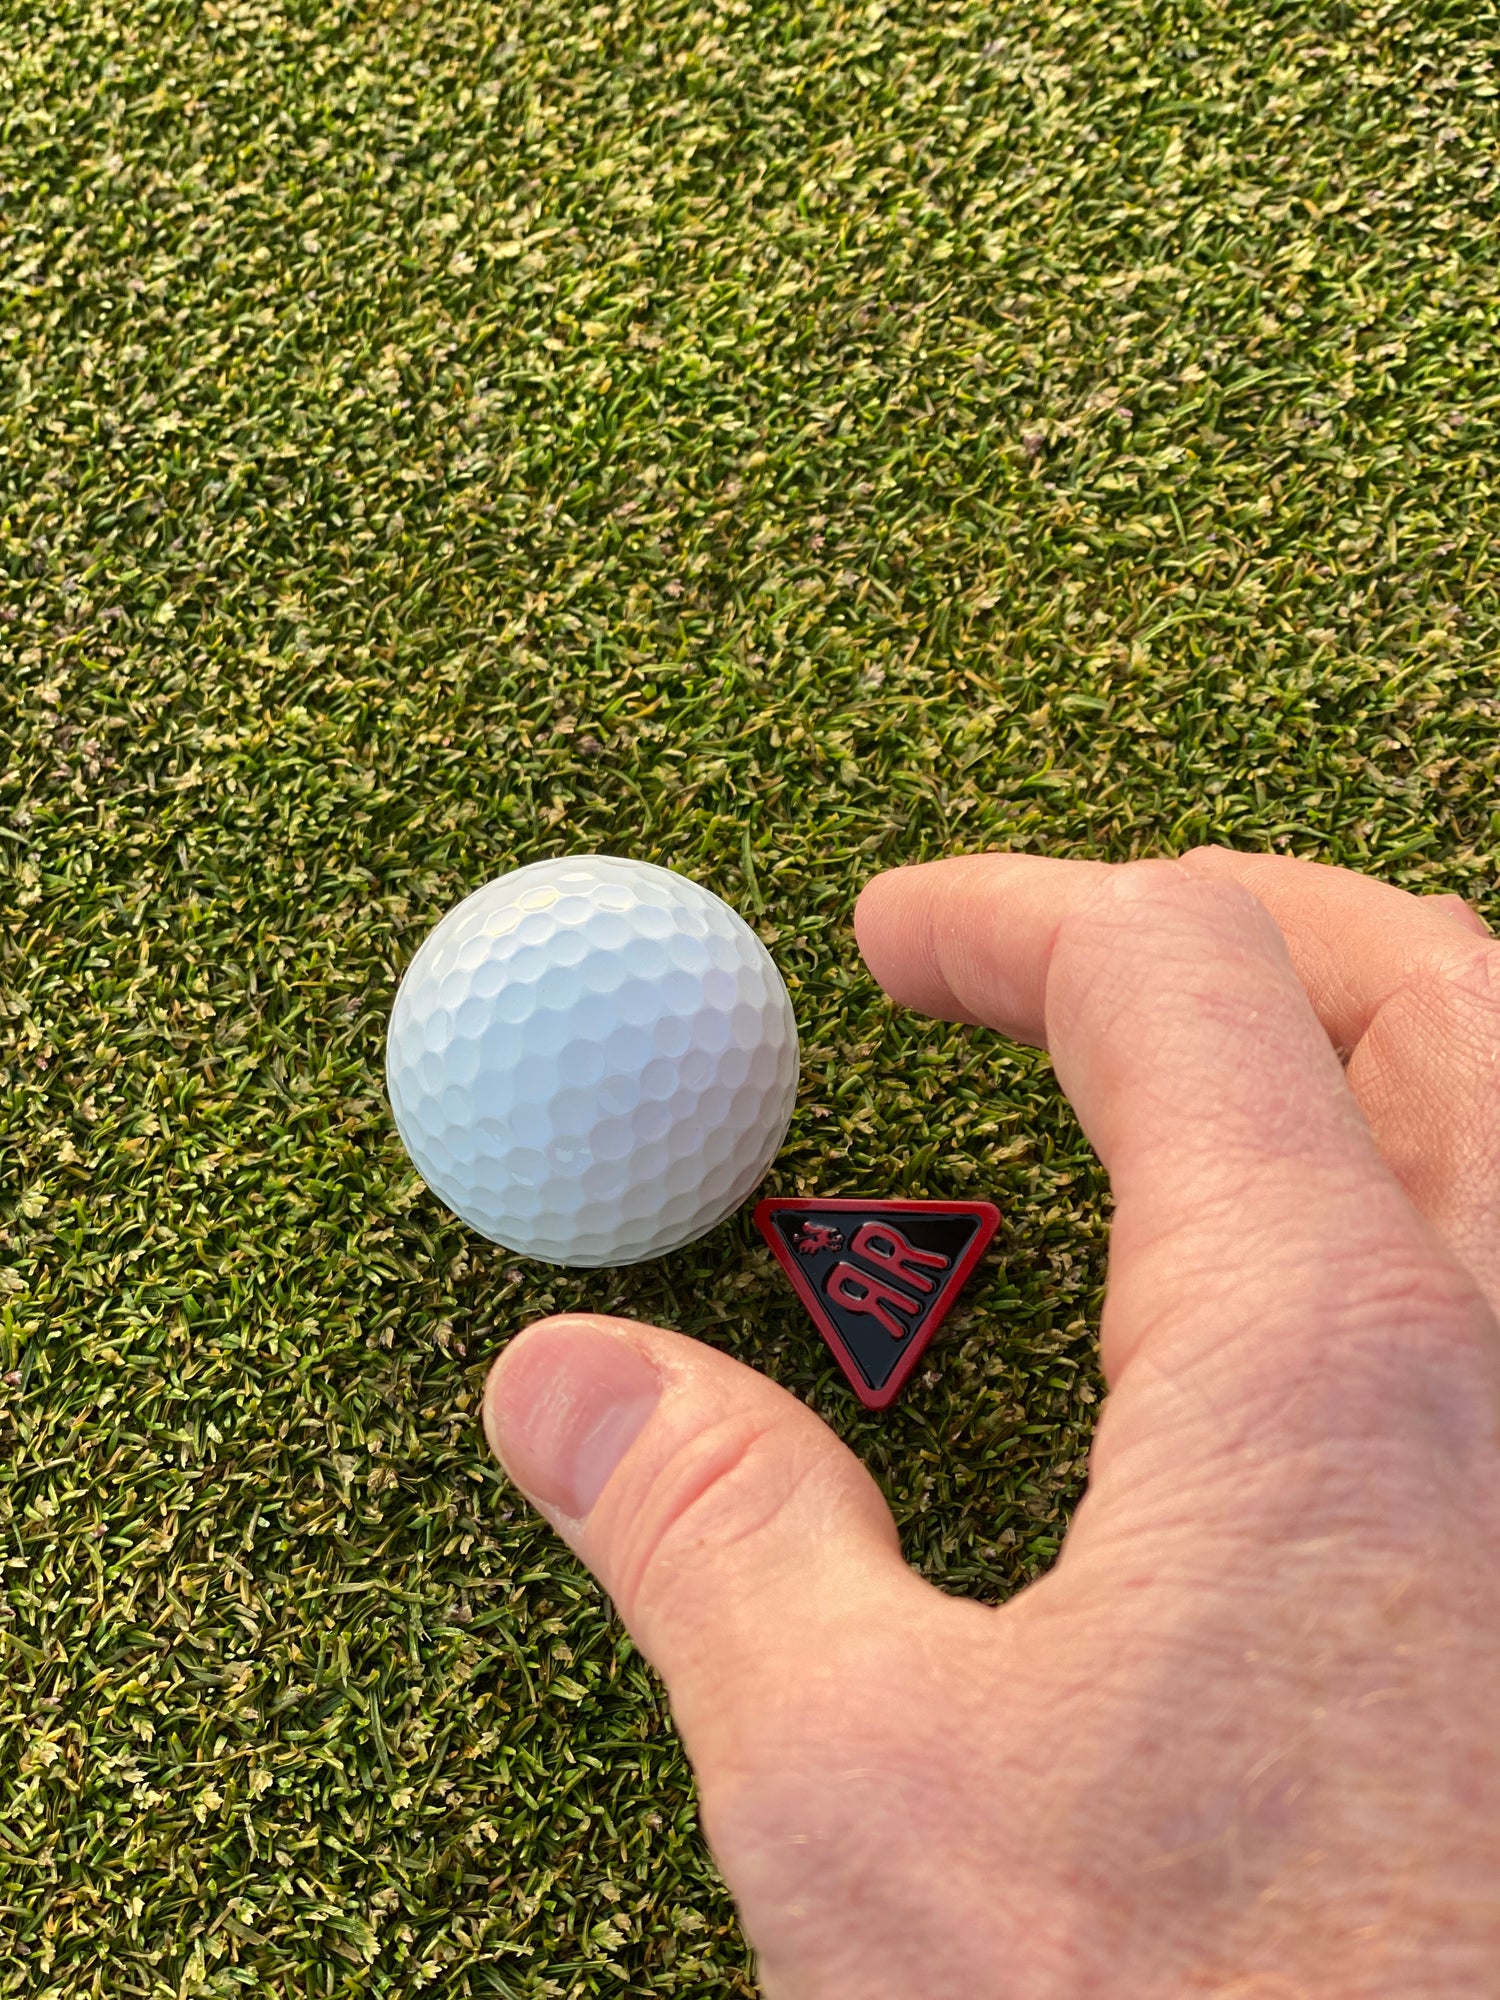 The Acute ball marker with golf ball